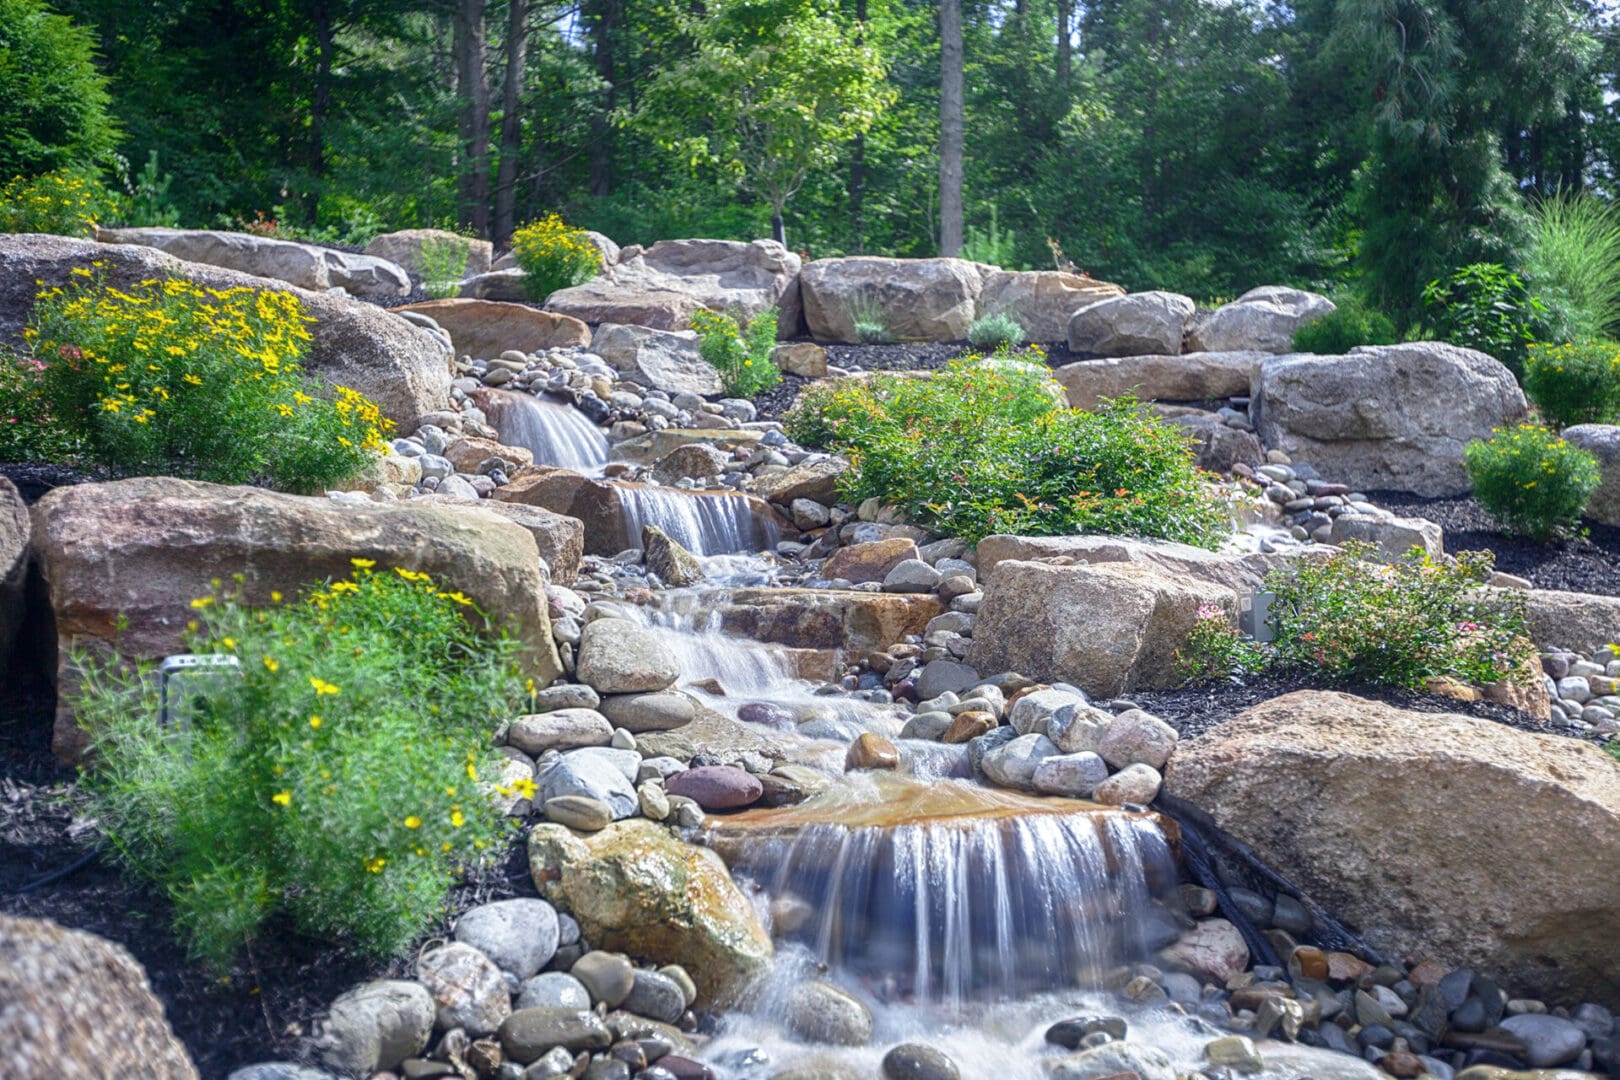 A small waterfall in a rocky area with water features.